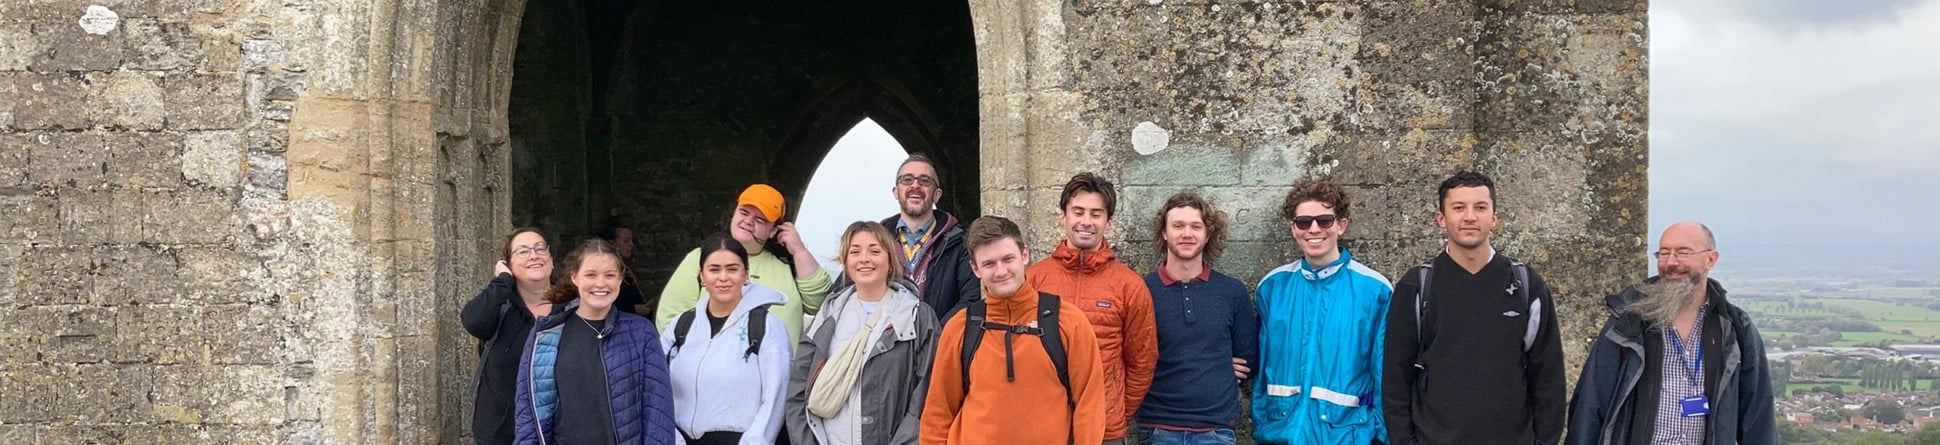 A group of smiling people posed in front of the archway of a church atop a tor.